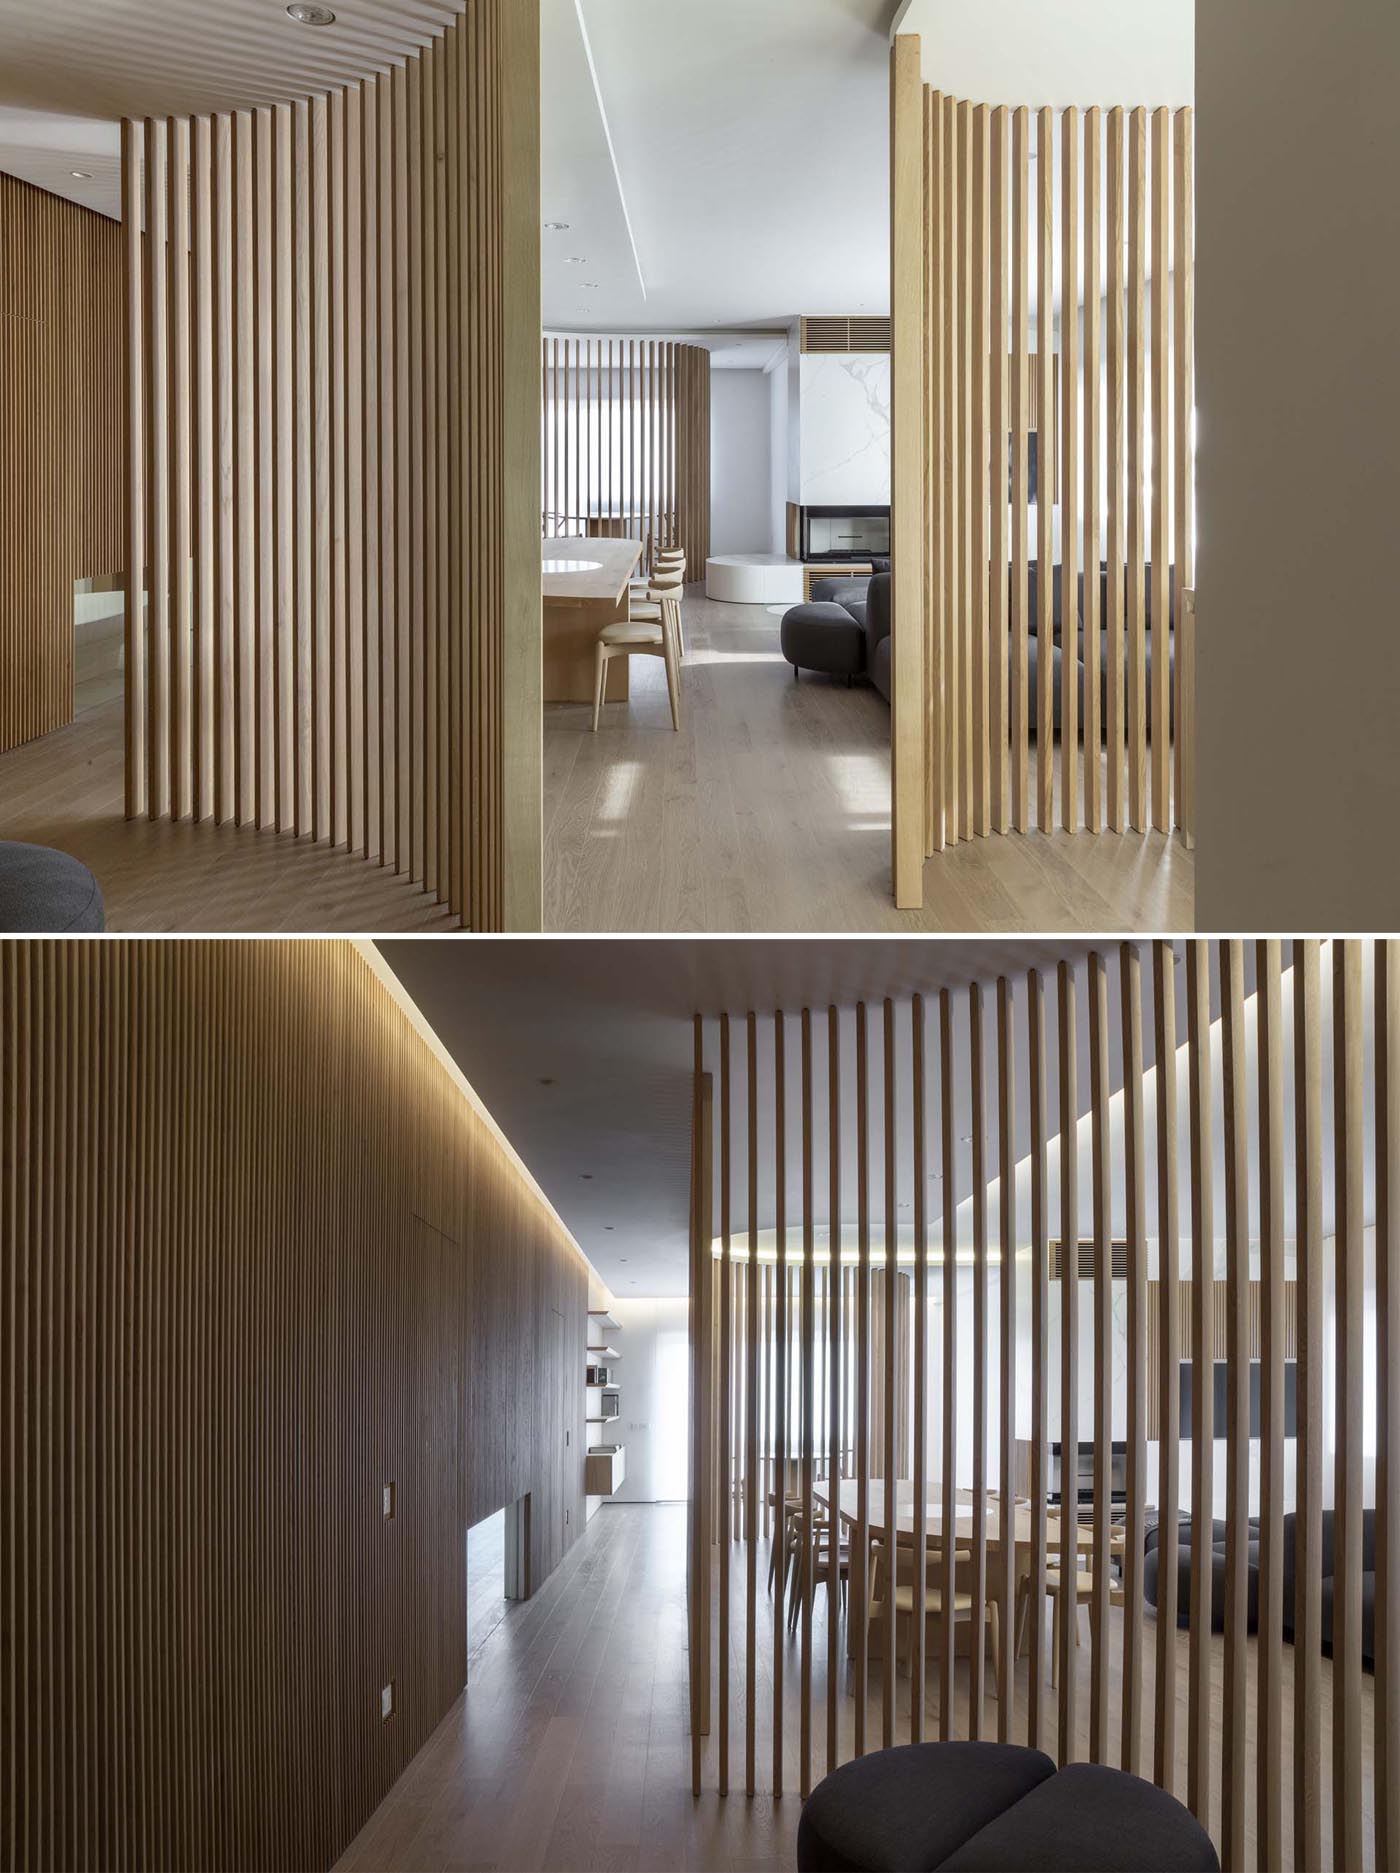 A modern apartment interior uses oak partitions to create zones for the living room, dining area, study, and kitchen.